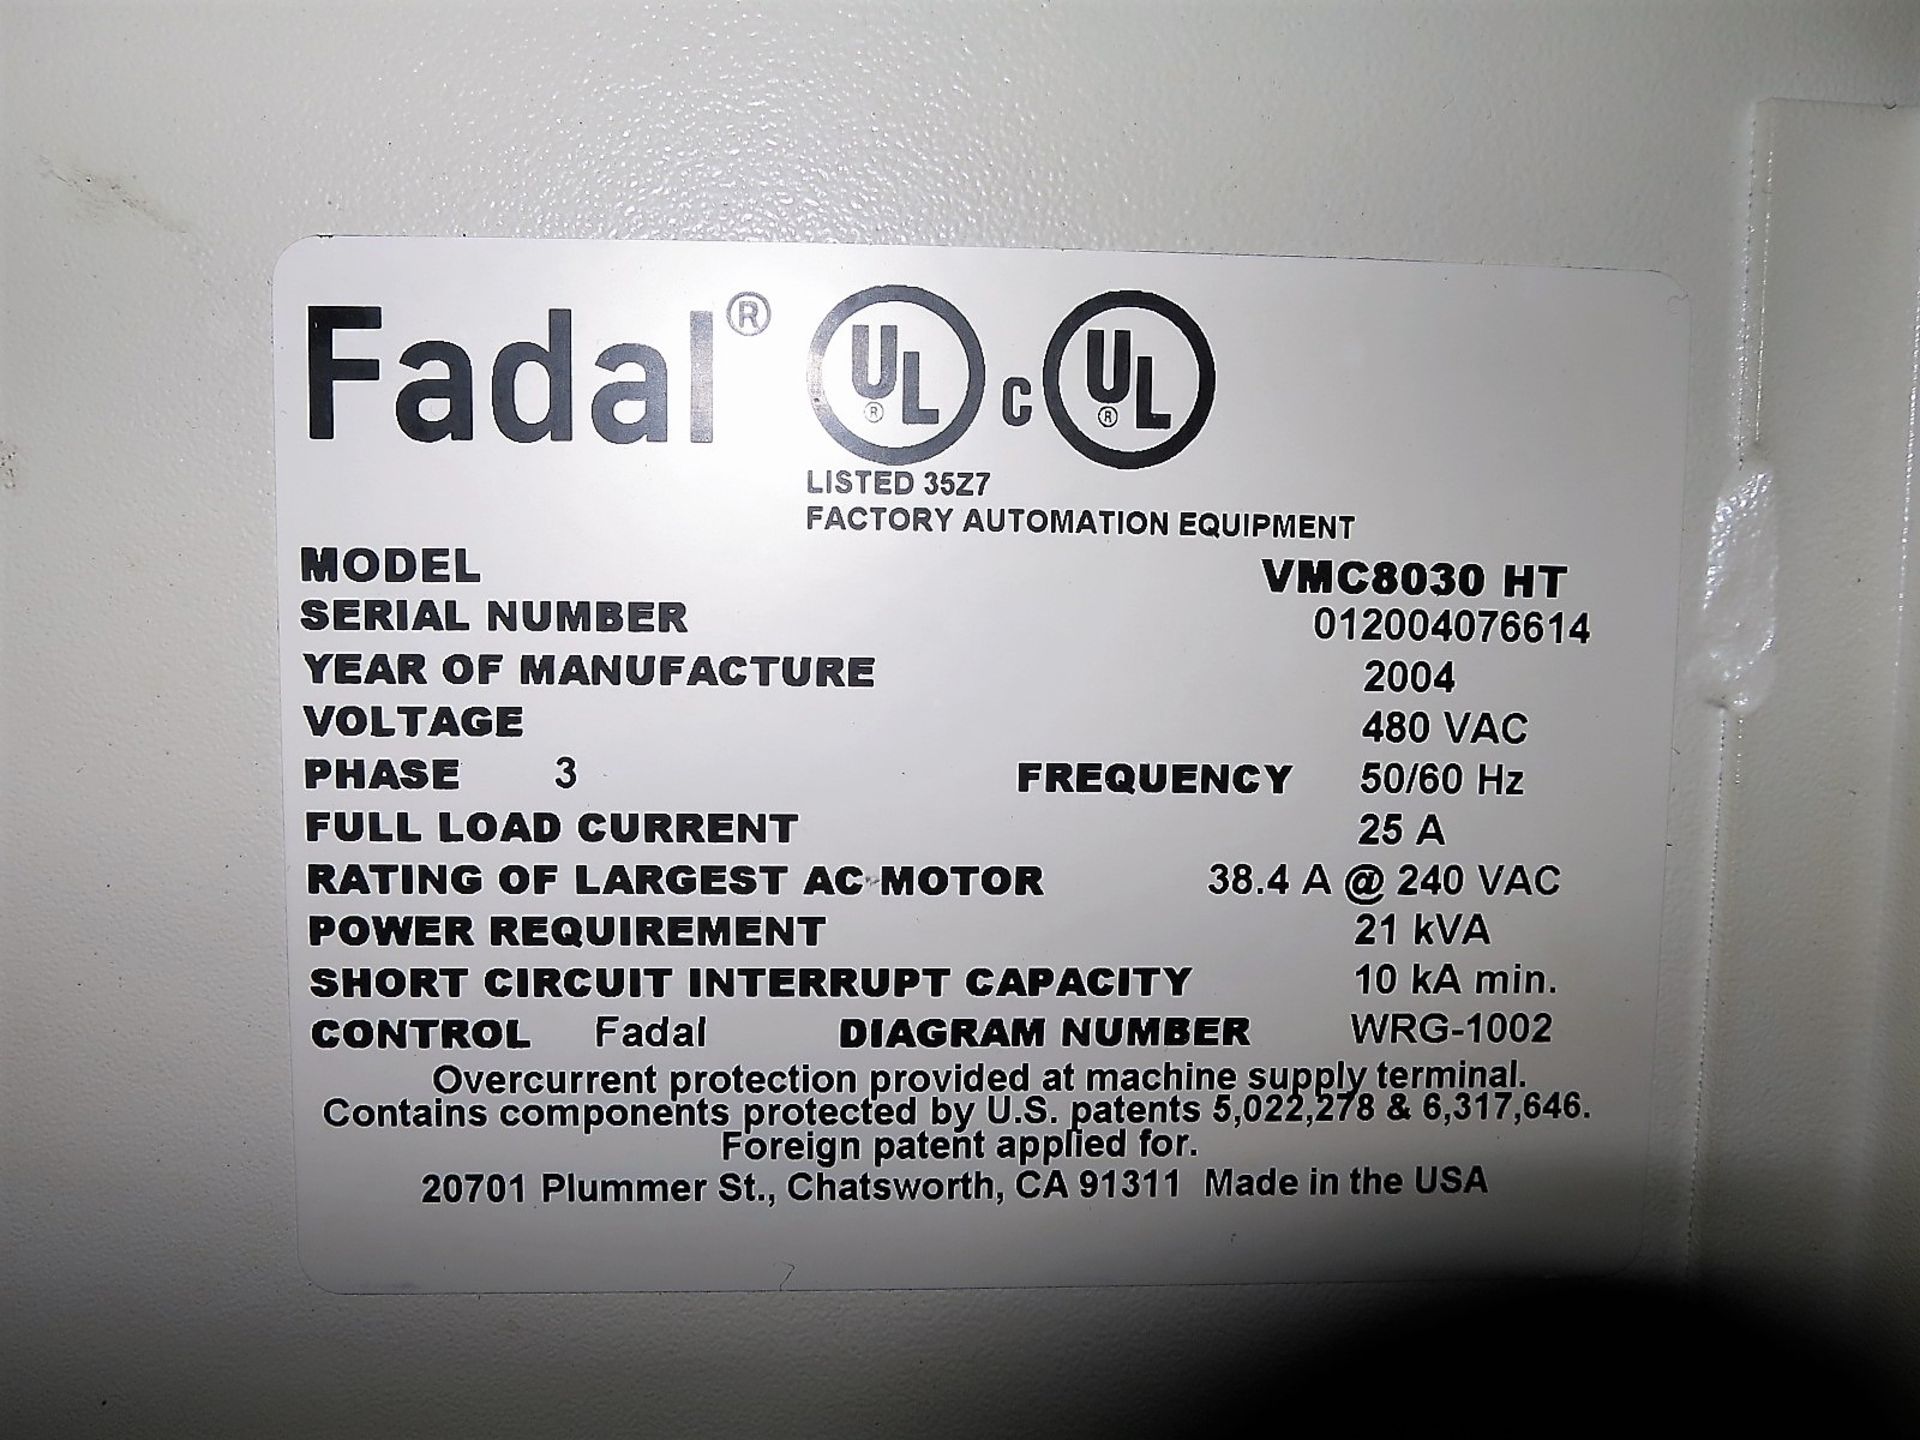 Fadal VMC 8030-HT CNC 3-Axis Vertical Machining Center, S/N 012004076614, New 2004 - Image 7 of 7